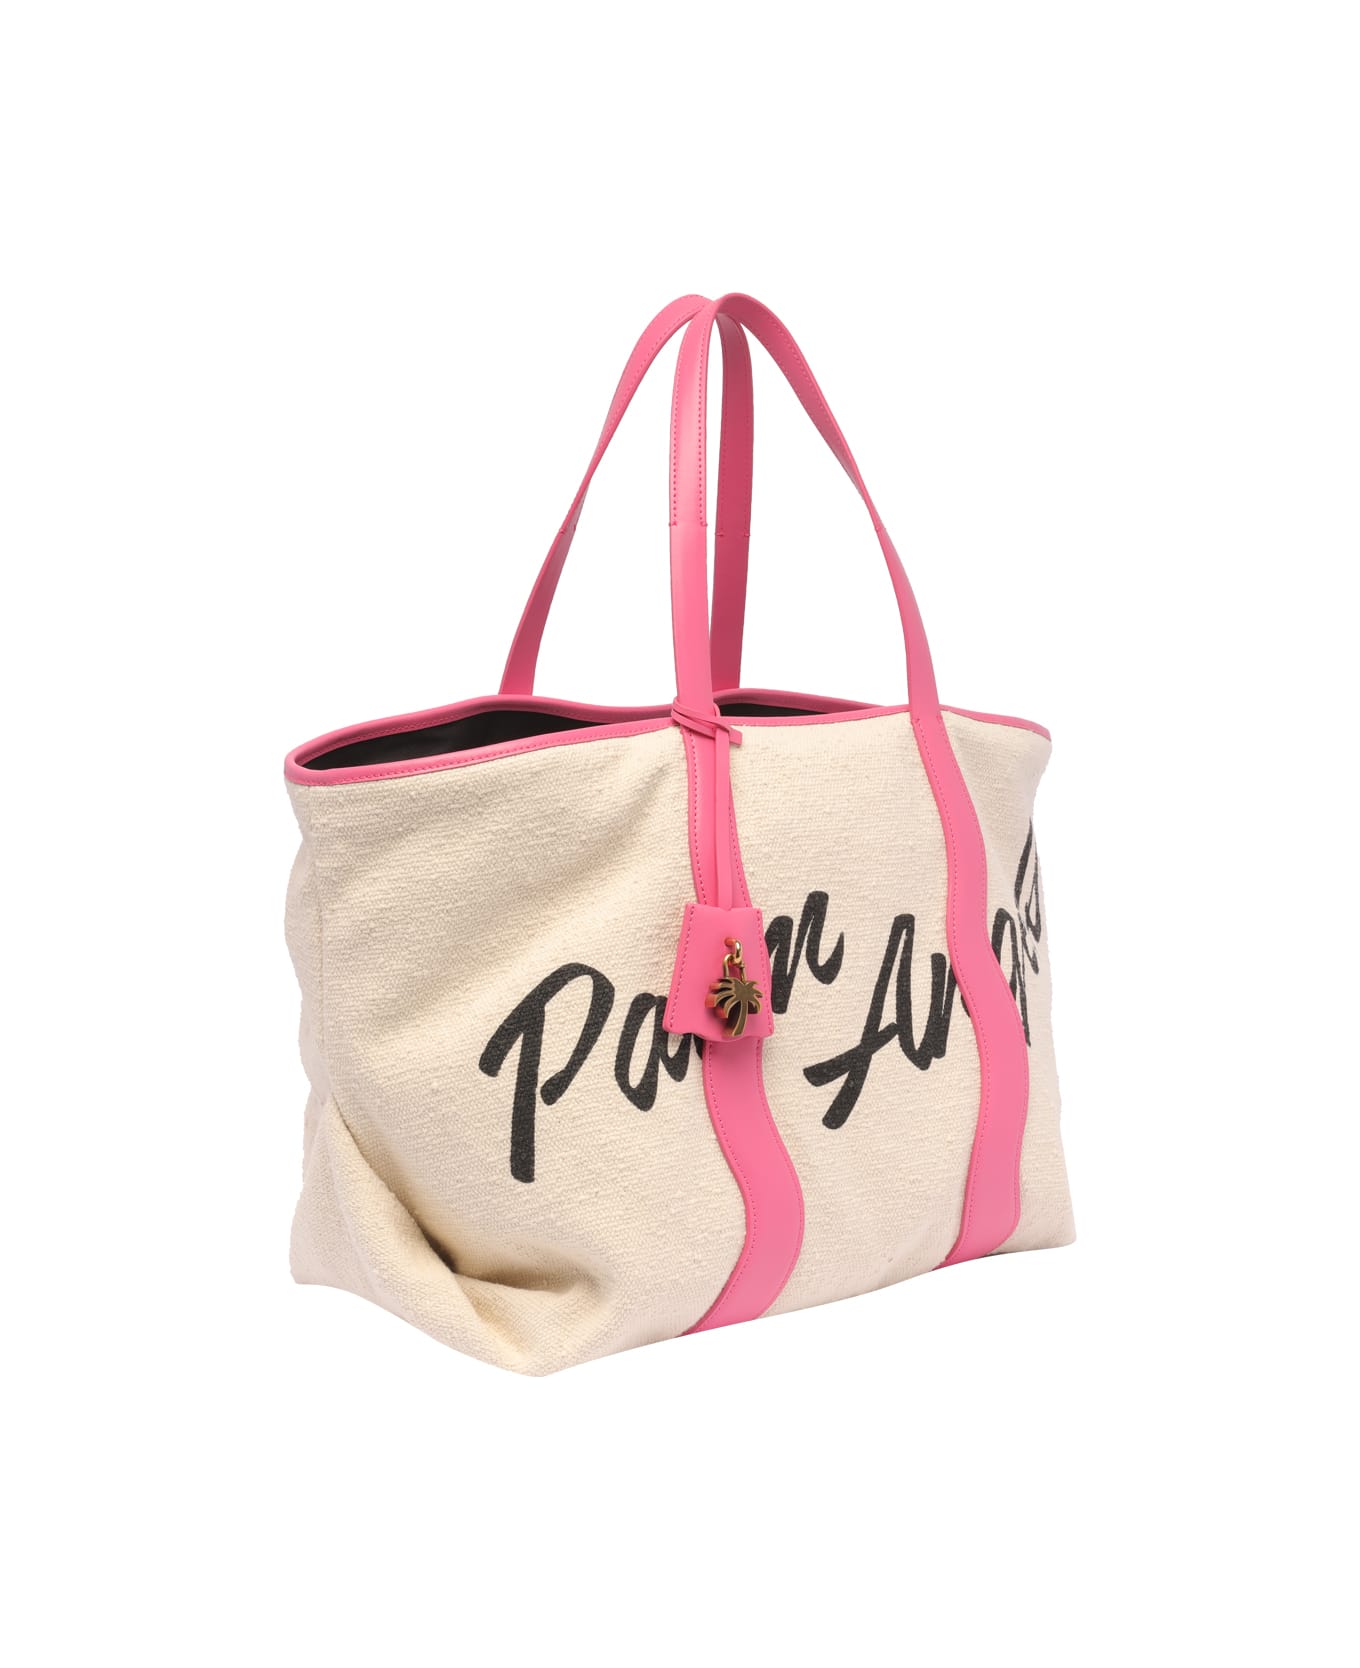 Palm Angels Tote Bag - White トートバッグ